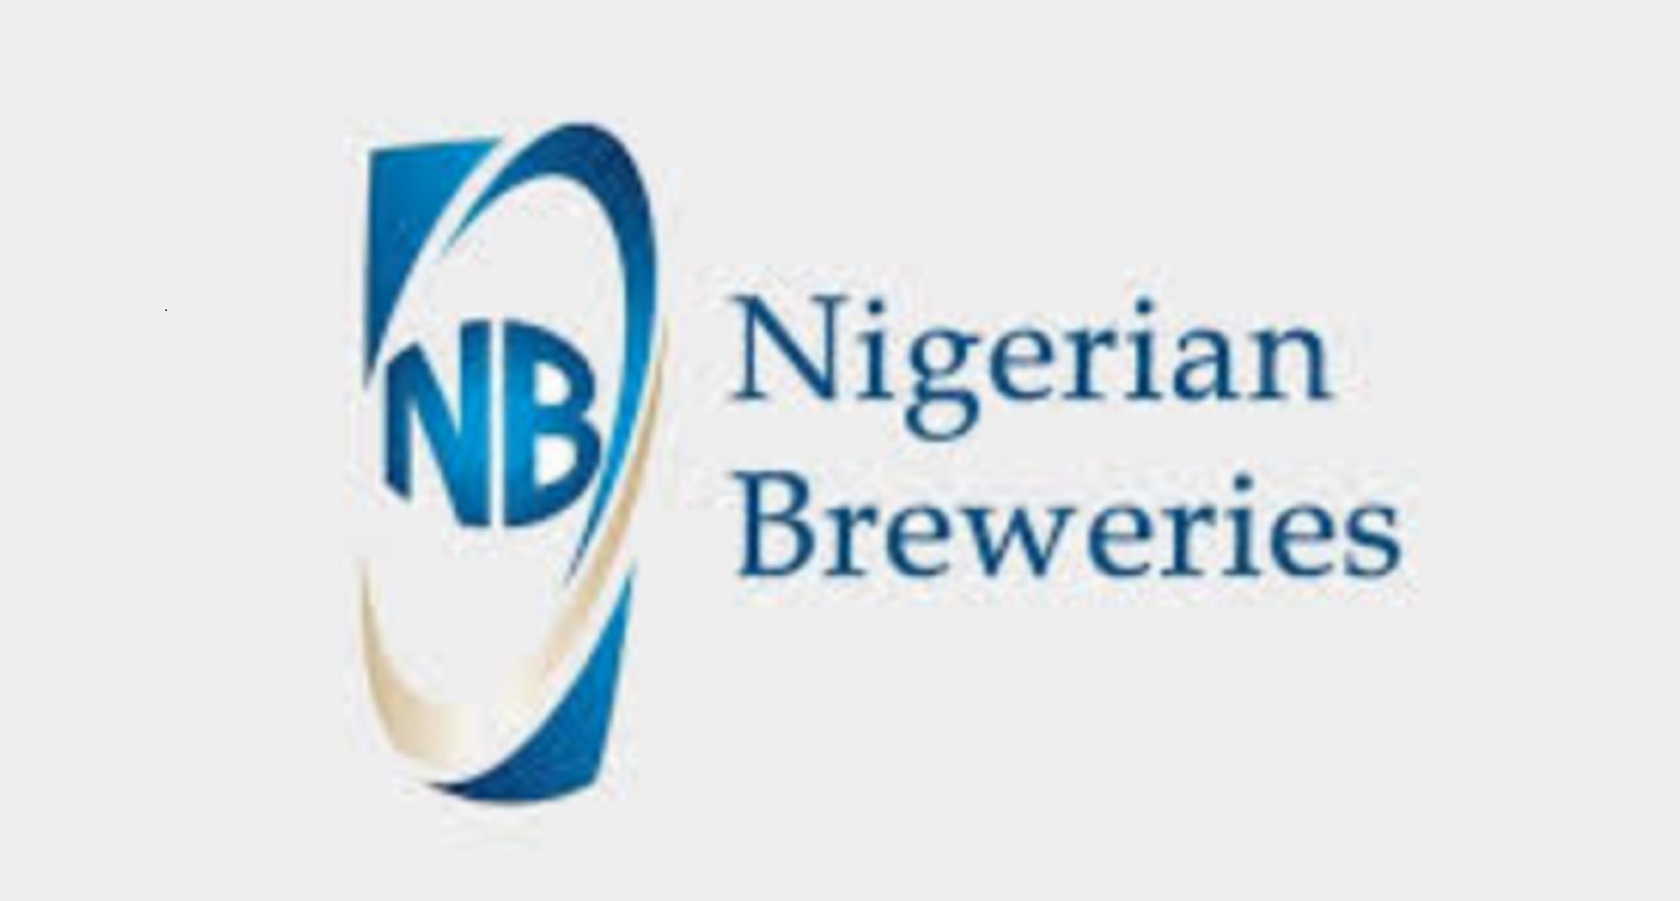 Nigerian Breweries Announces Major Changes to Boost Business